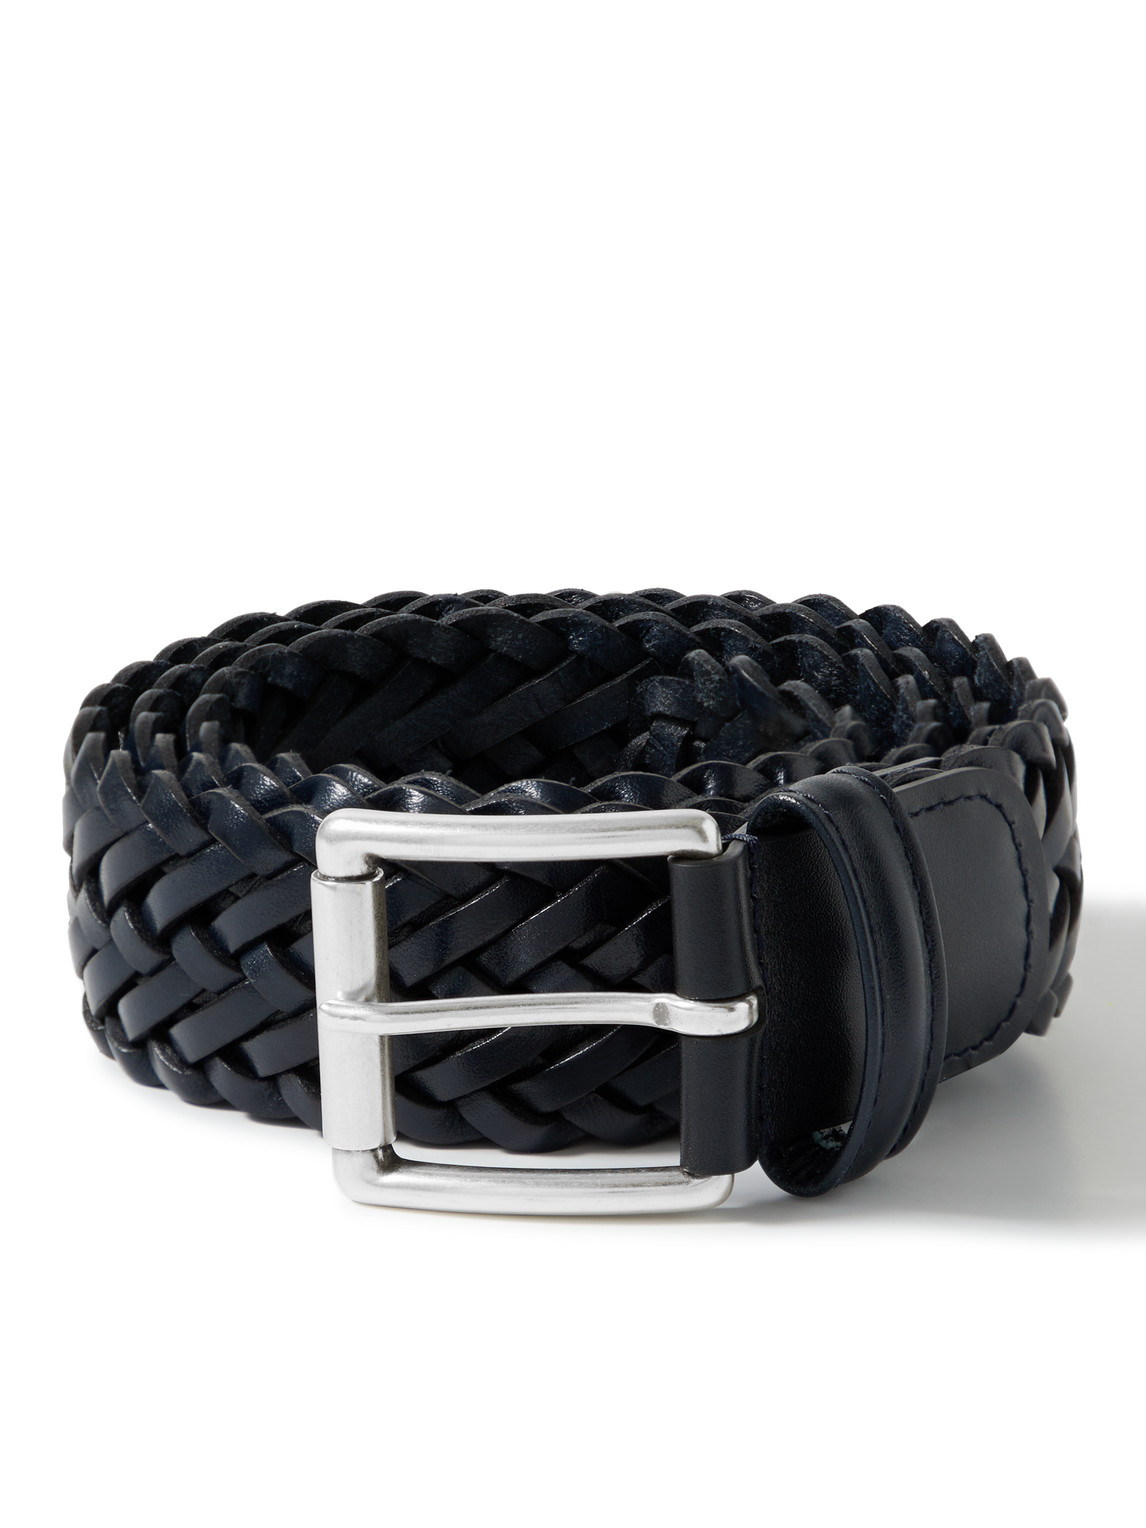 ANDERSON'S 3.5CM WOVEN LEATHER BELT